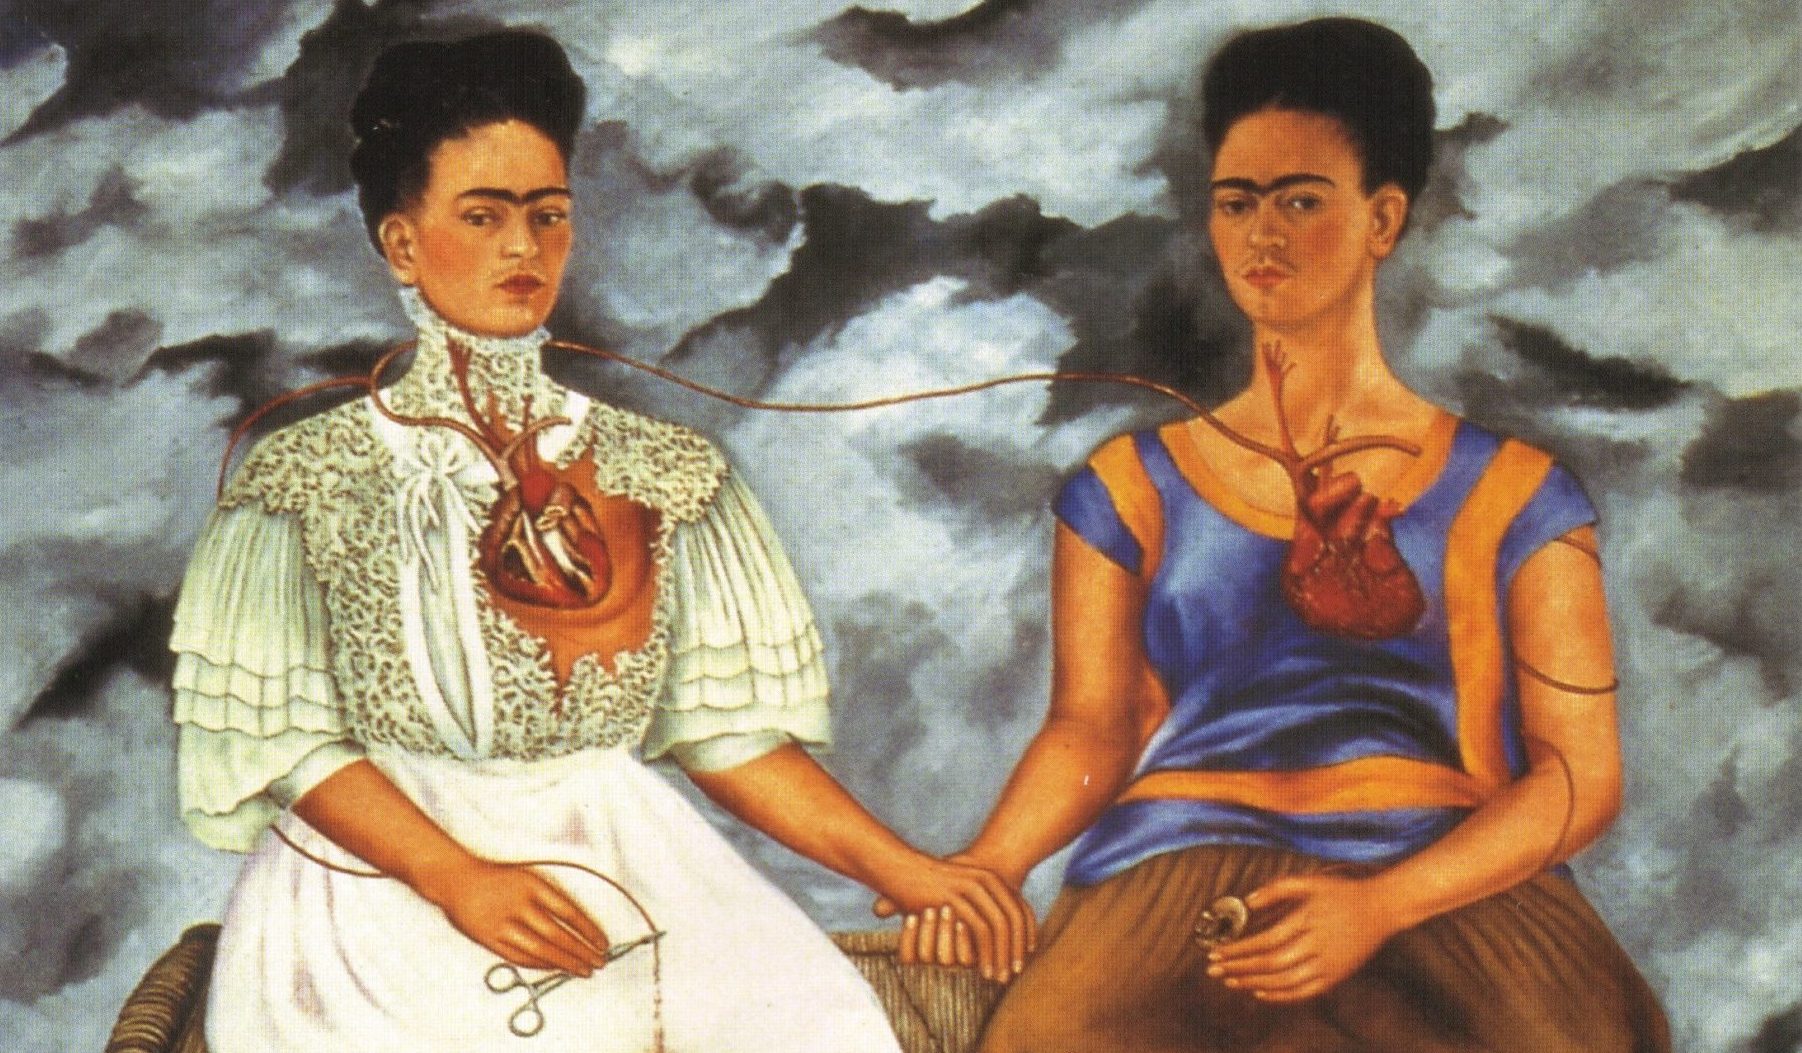 Why does Frida Kahlo's fame outshine other women artists?